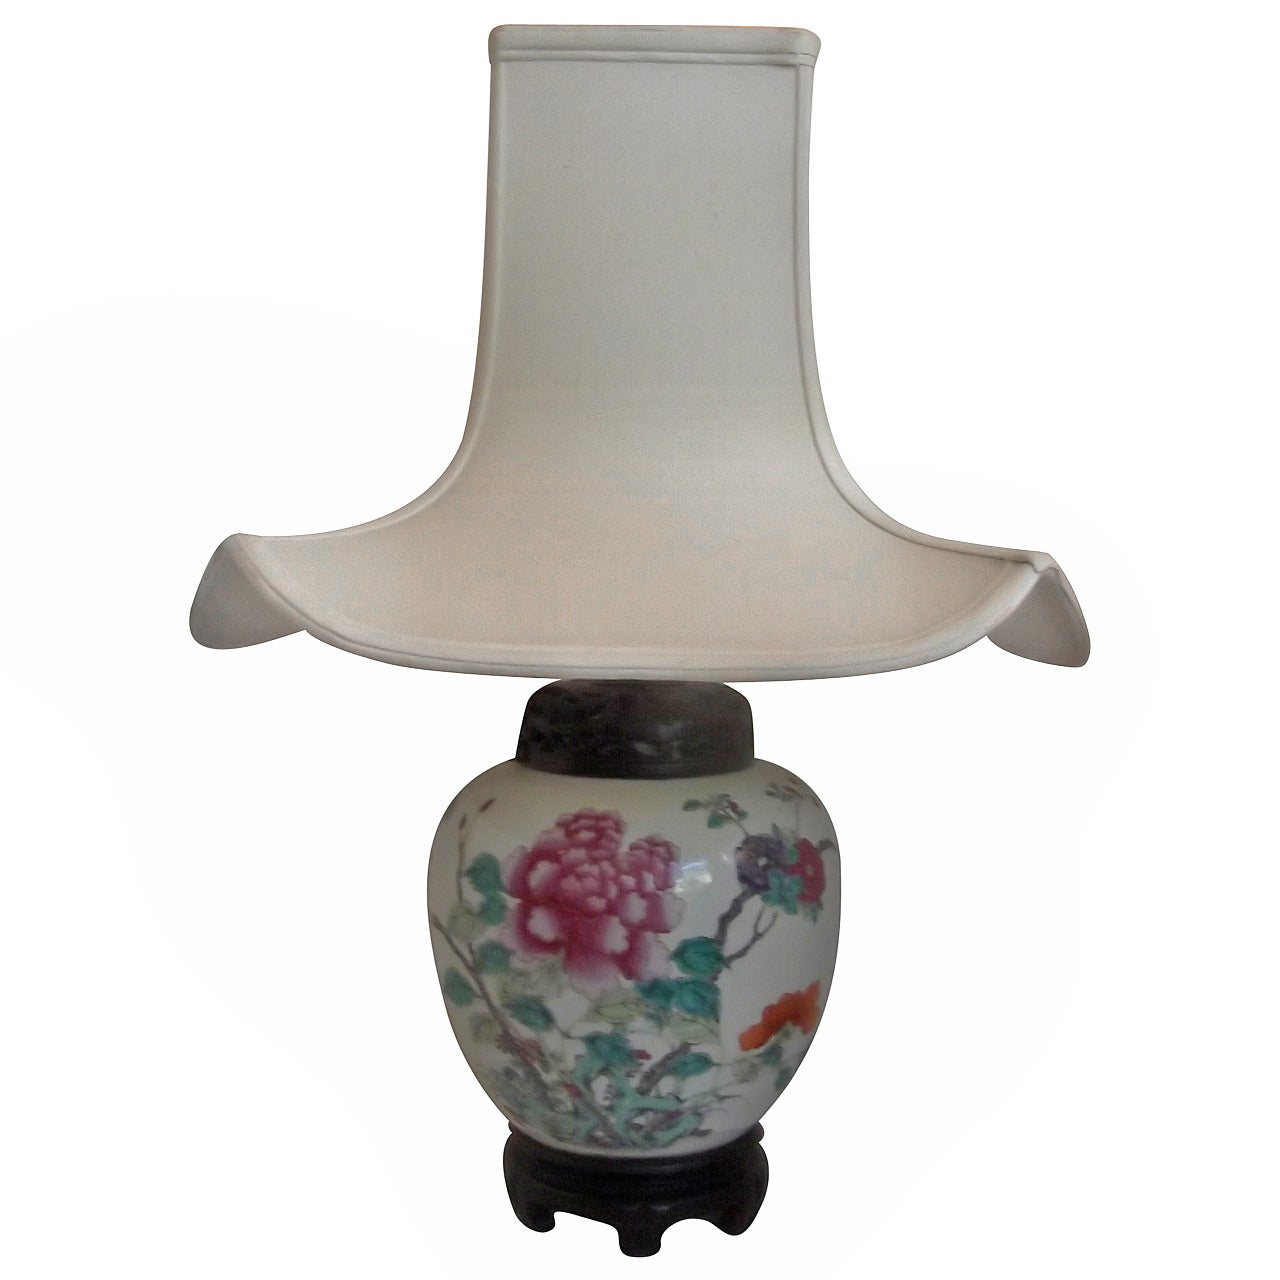 Mid-19th Century Chinese Export Lamp with Silk Shade